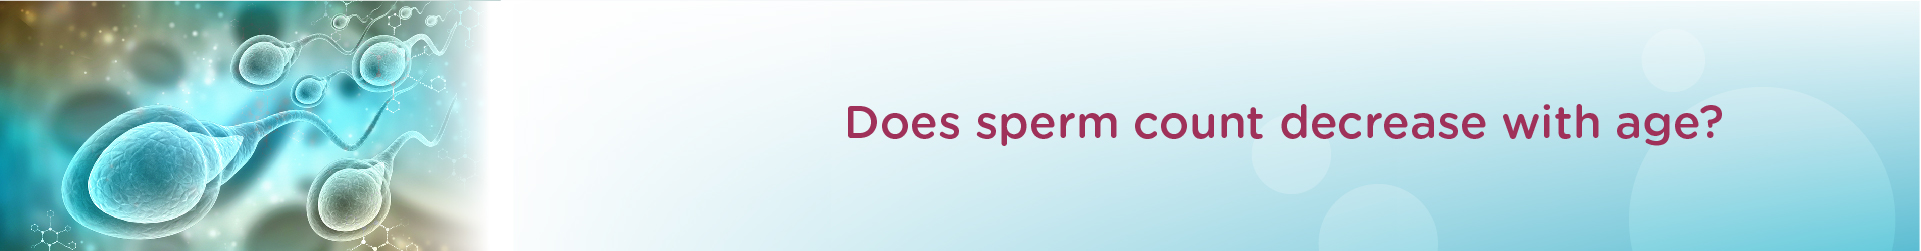 Do sperm count decrease with age?